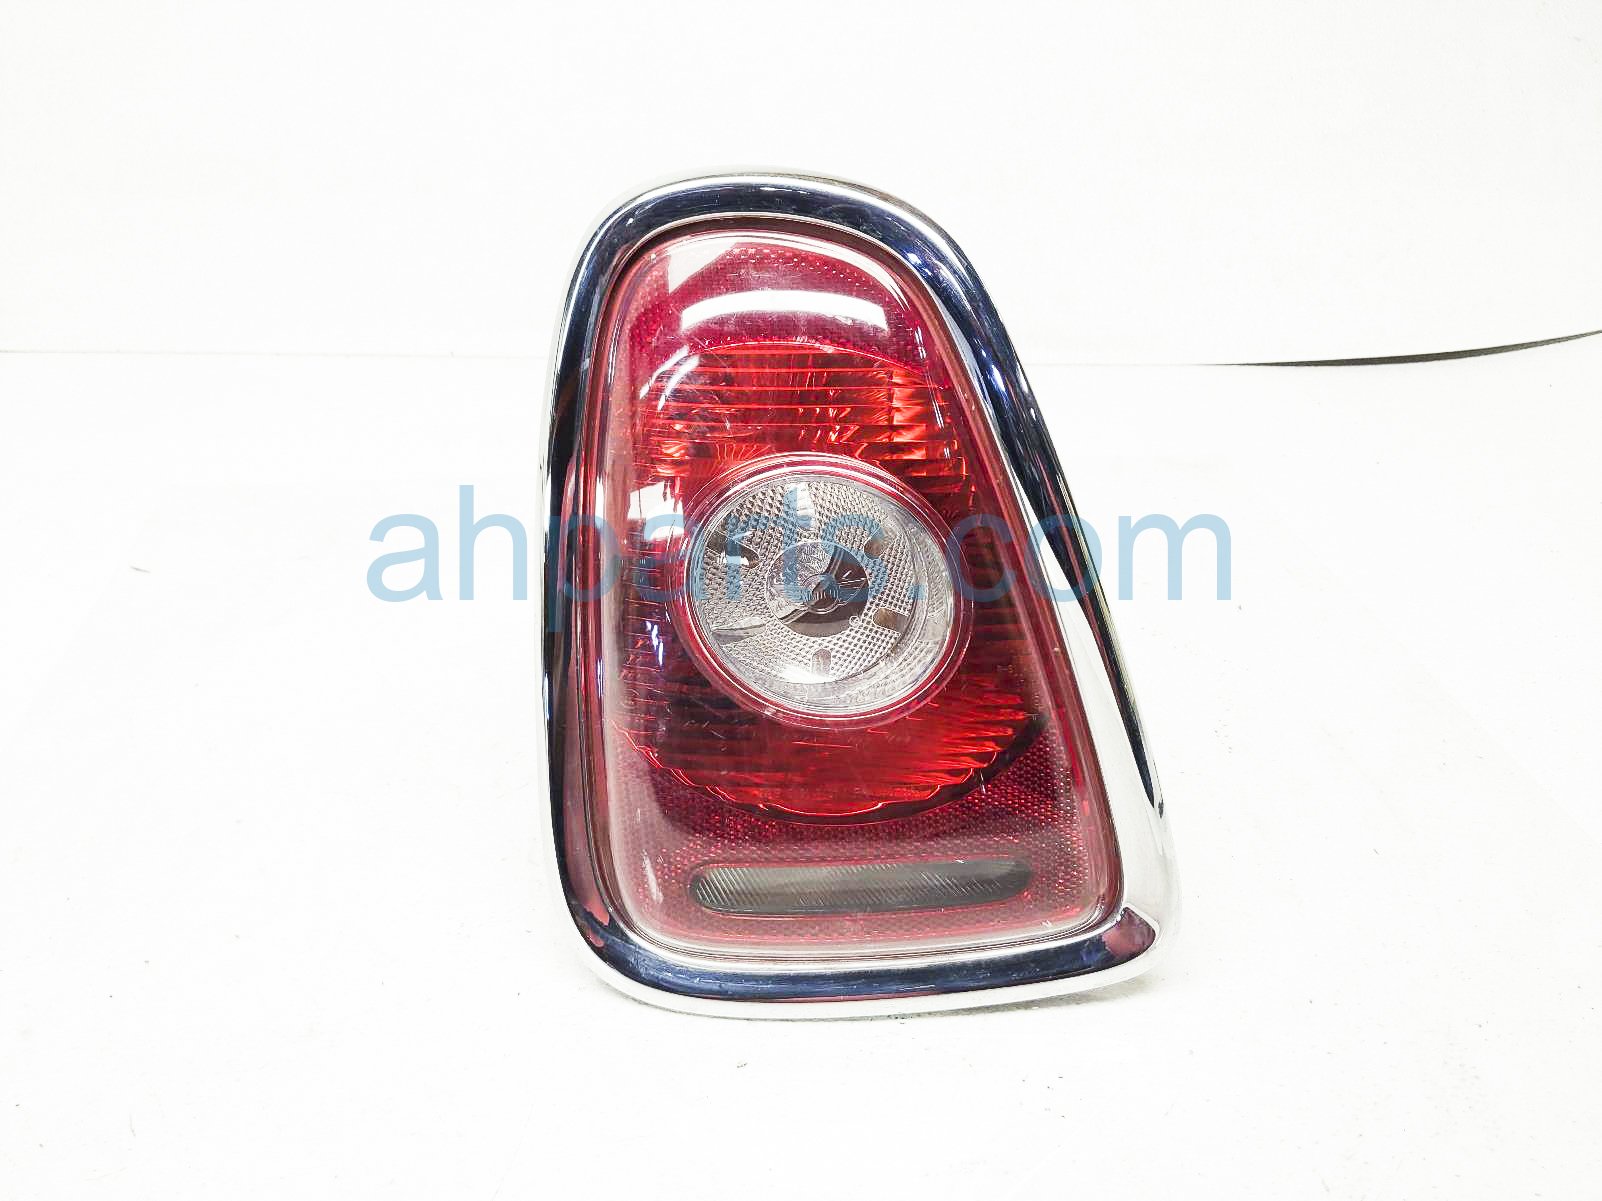 $50 BMW LH TAIL LAMP / LIGHT (ON BODY)- NOTE